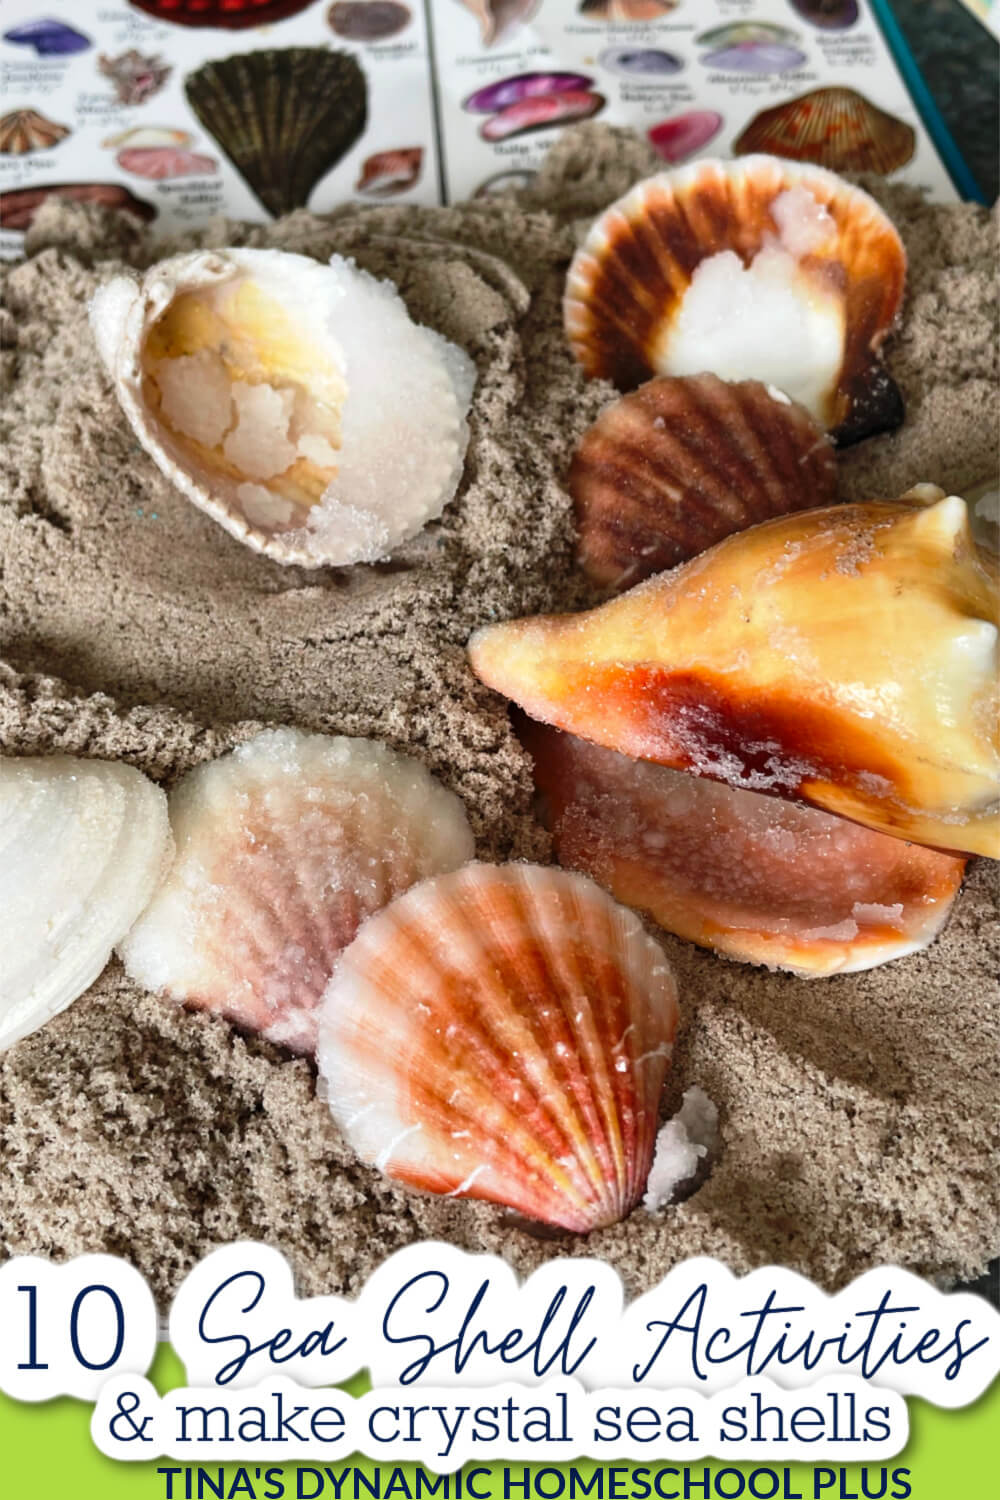 A Collection of Sea Shells in a Seashell